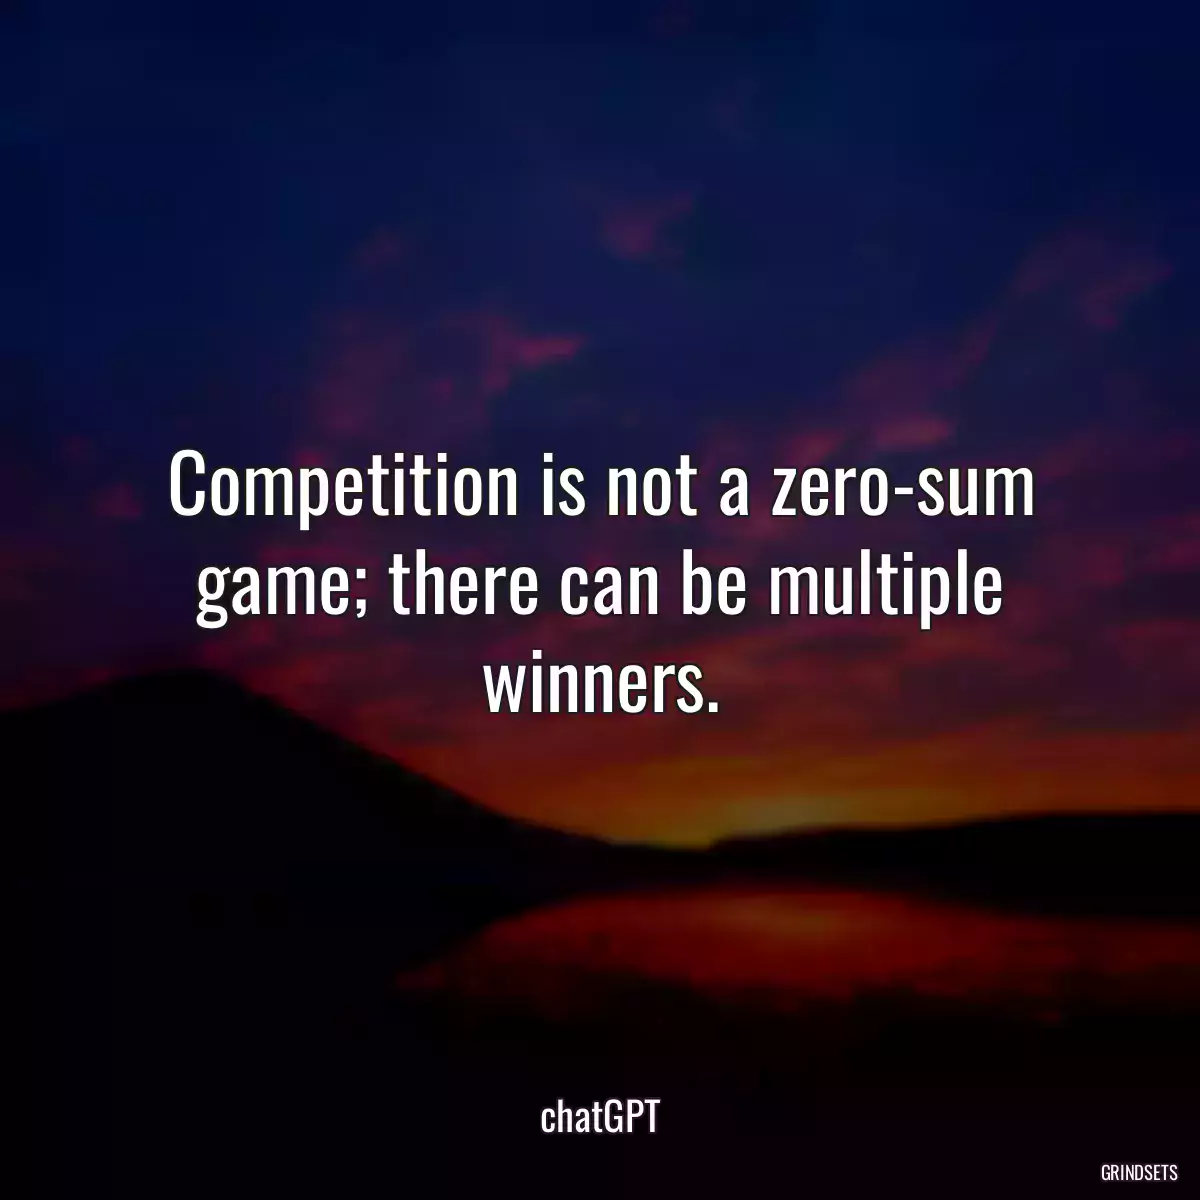 Competition is not a zero-sum game; there can be multiple winners.